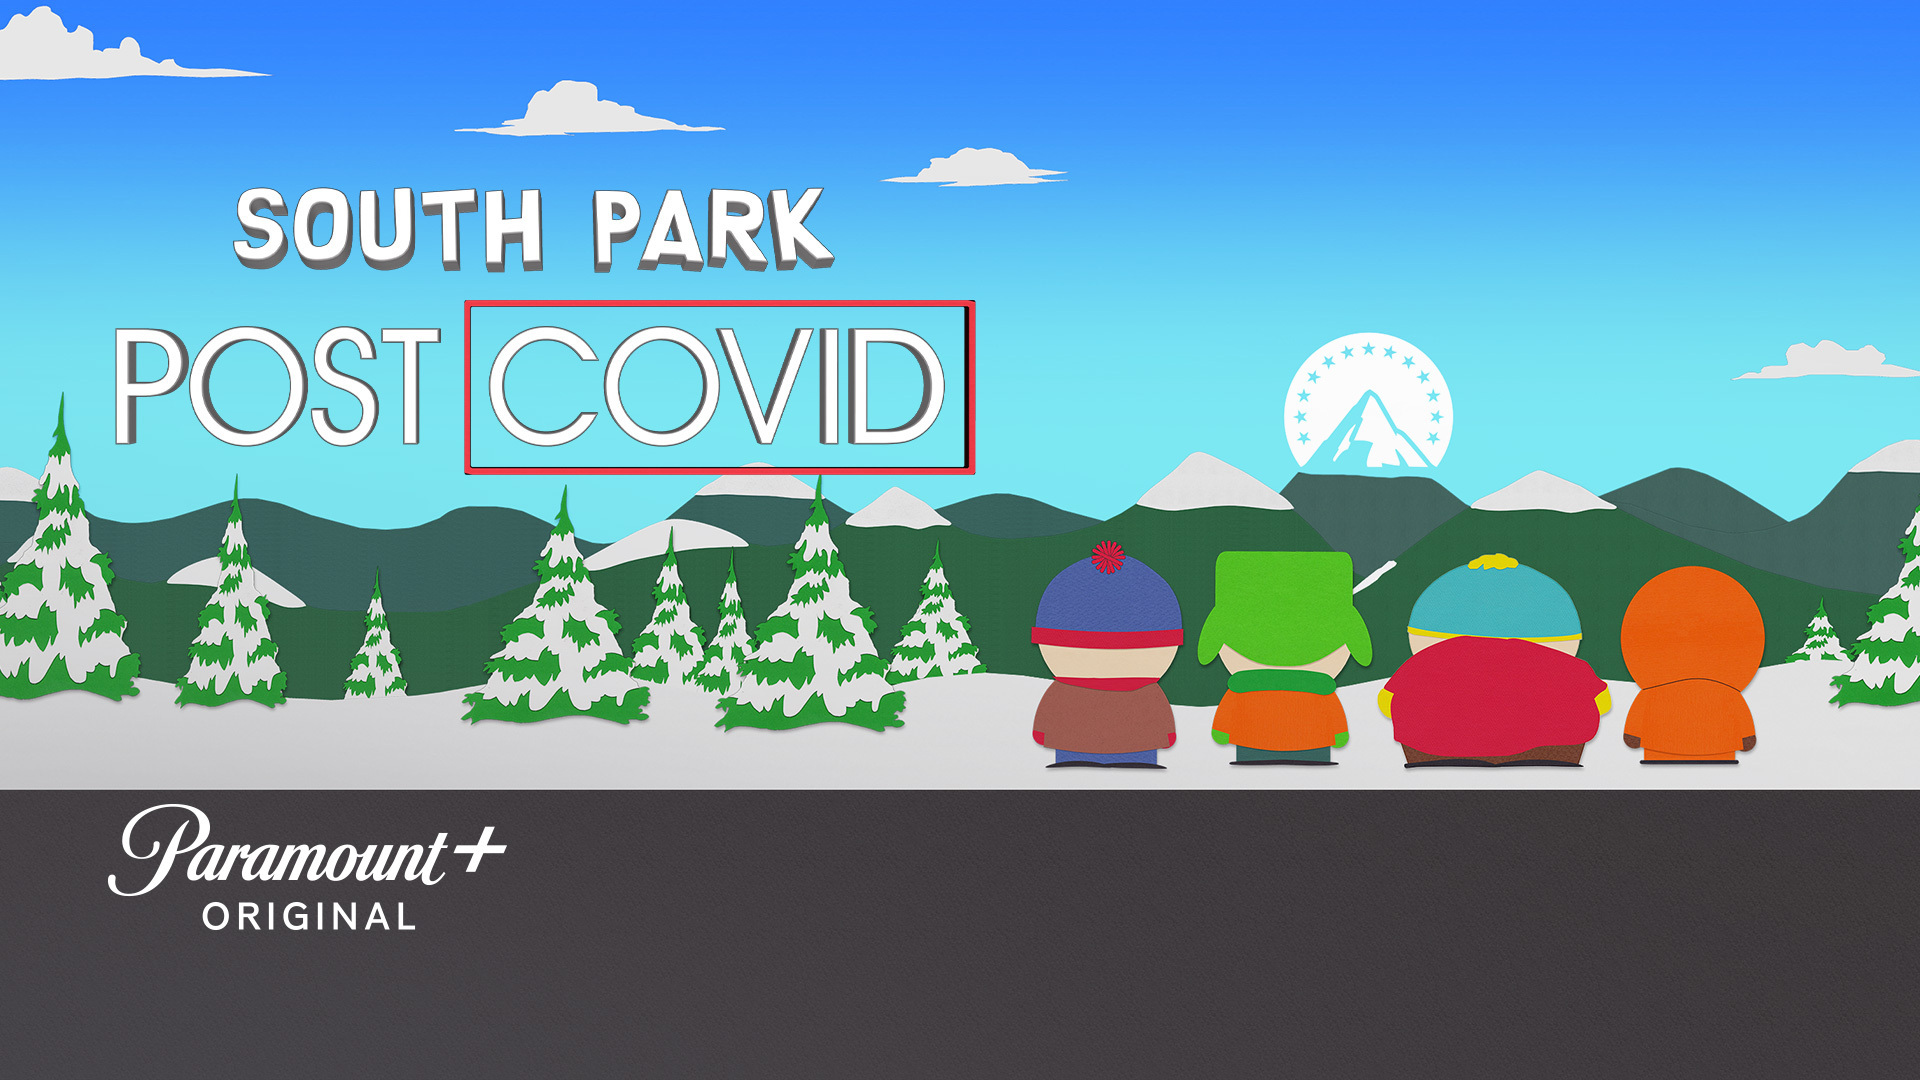 SOUTH PARK POST COVID Watch Full Movie on Paramount Plus